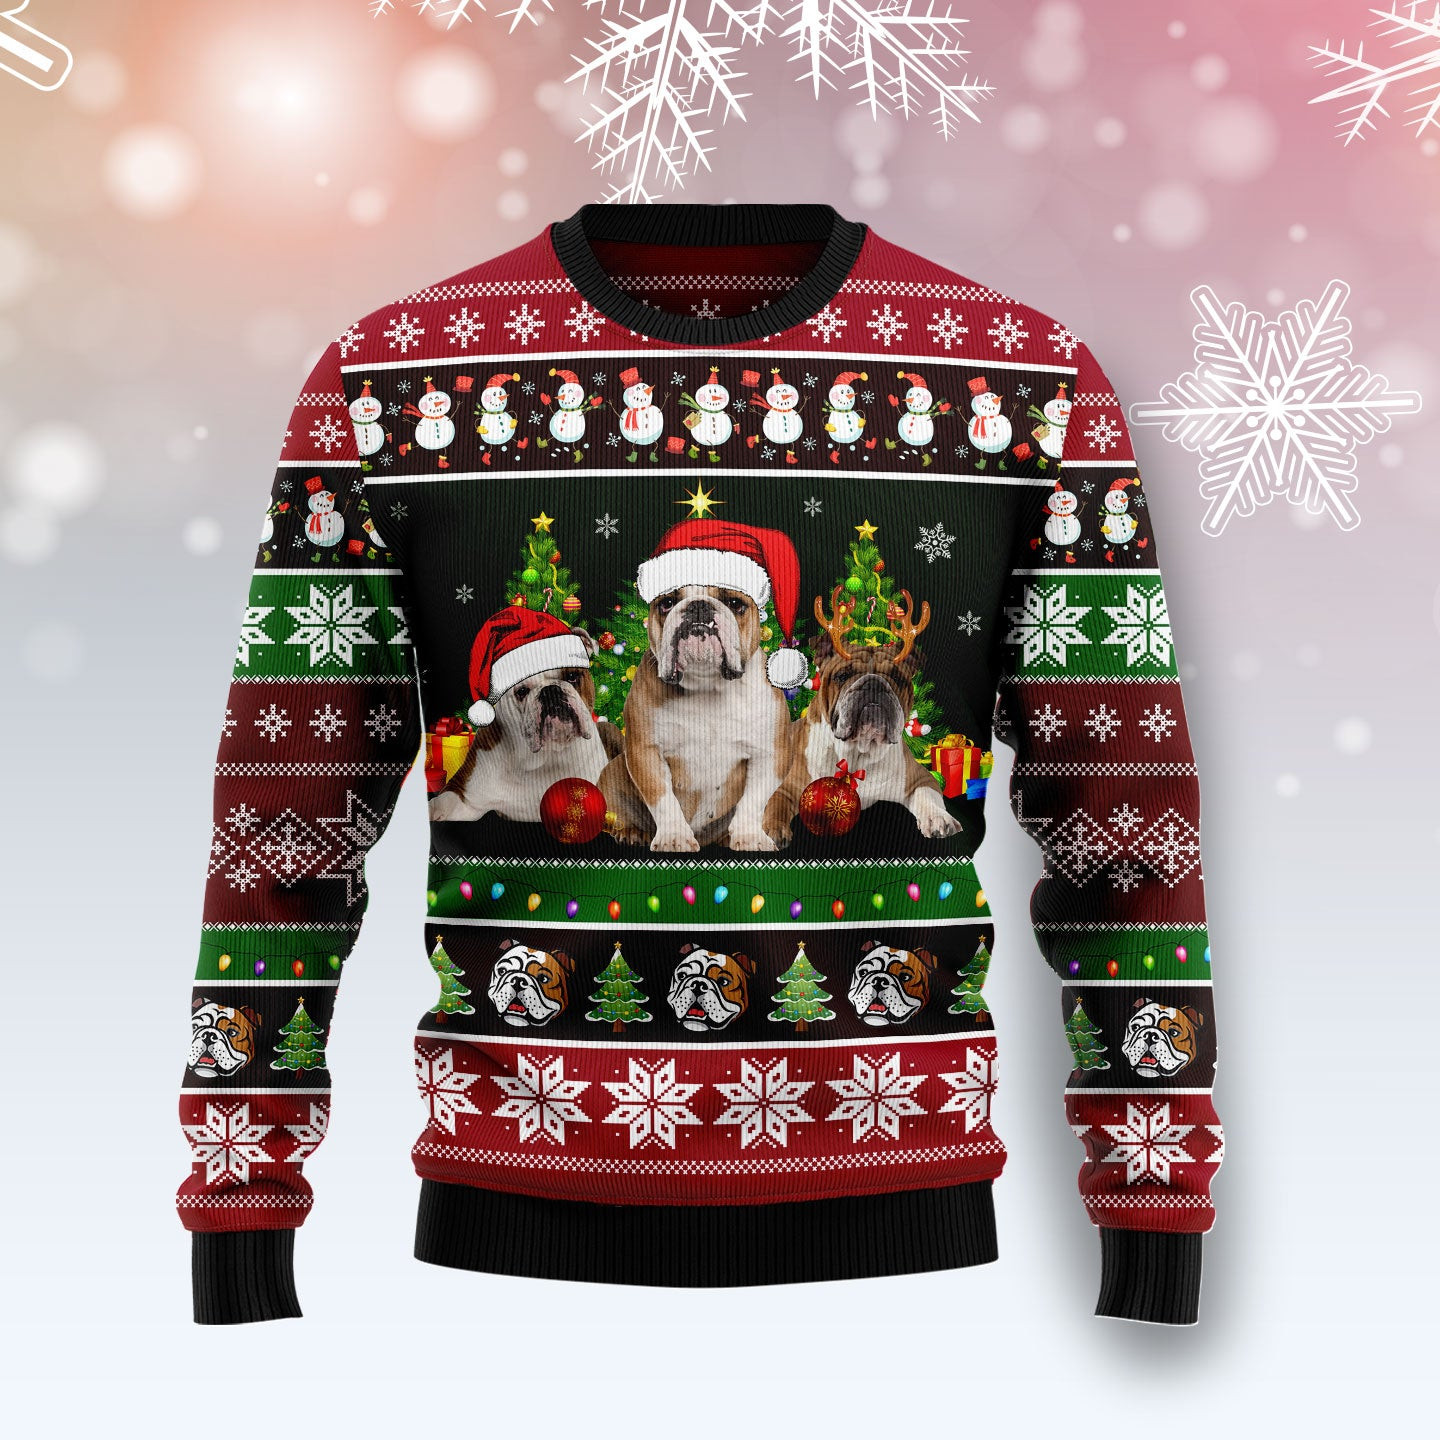 Bulldog Group Beauty Ugly Christmas Sweater, Ugly Sweater For Men Women, Holiday Sweater